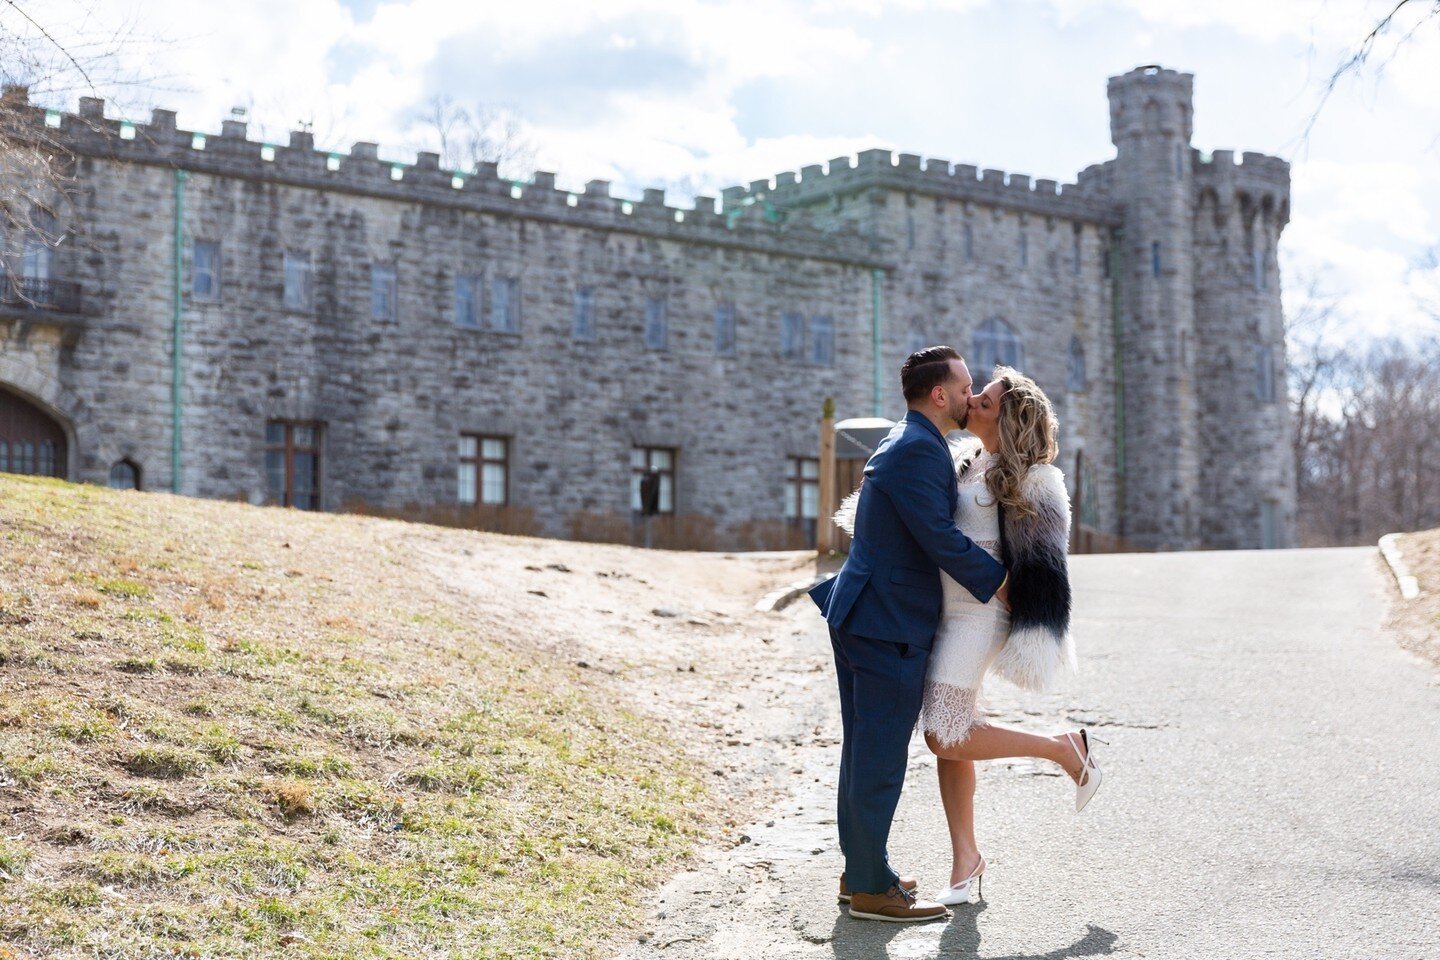 Last March brought us together with Nik and Lauren at a beautiful park in Long Island where we could get castle, woods and beach shots. Highly recommend this dynamic location to other engaged couples!!! 
.
.
.
.
.
.
@theknot @weddingwire @weddingpro 